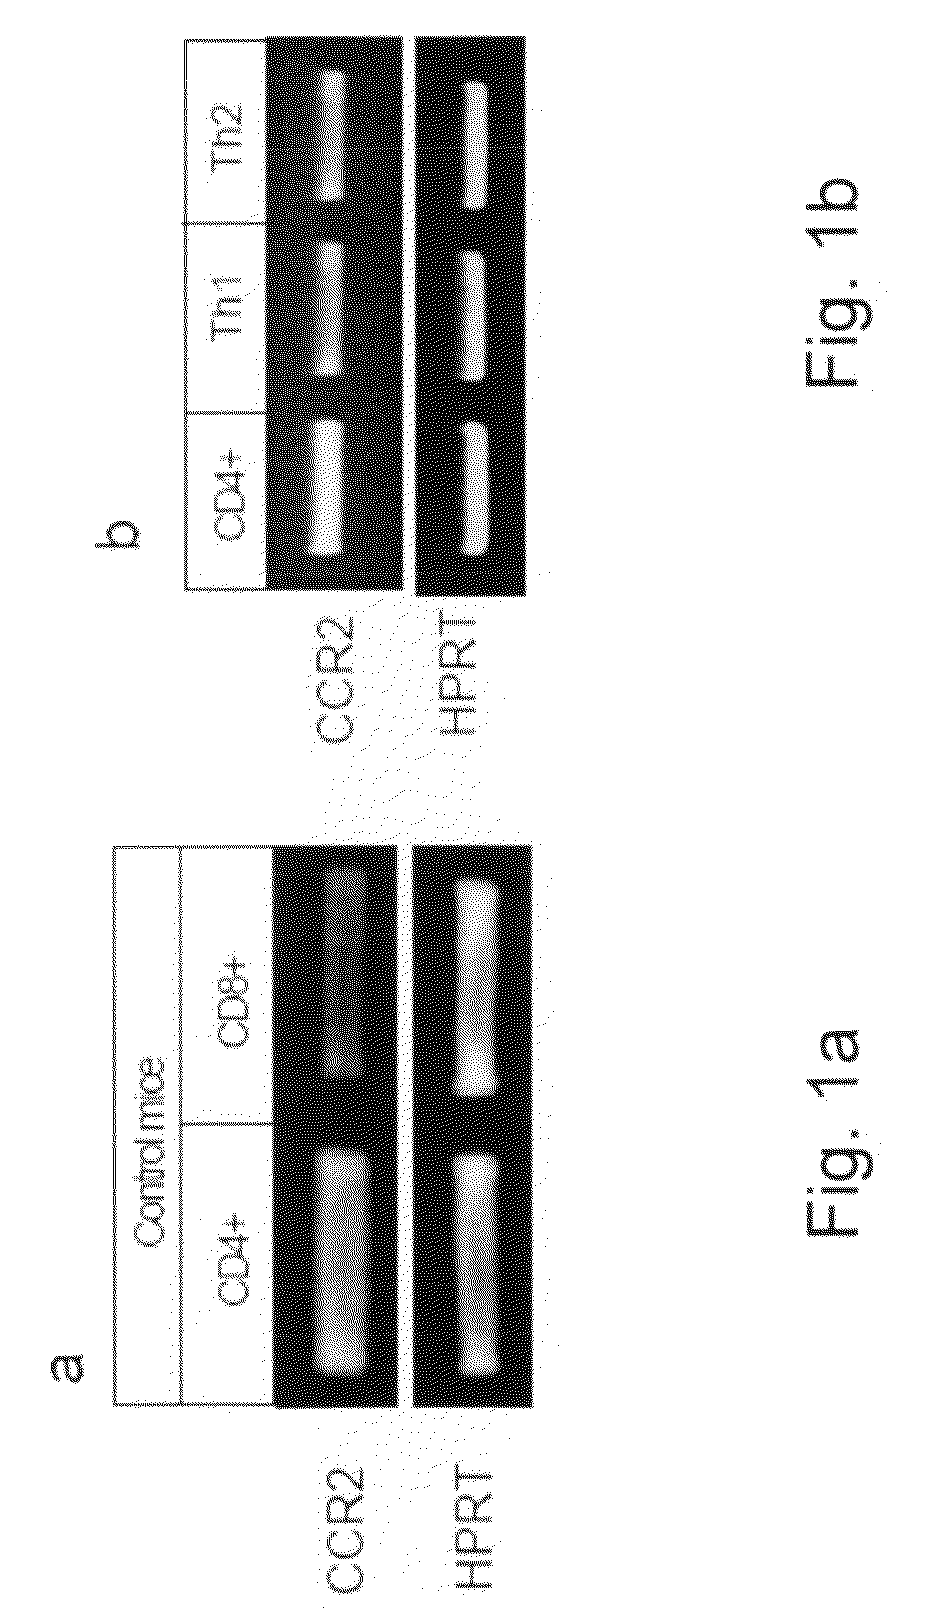 Pharmaceutical Compositions Comprising Ccl2 and Use of Same For The Treatment of Inflammation